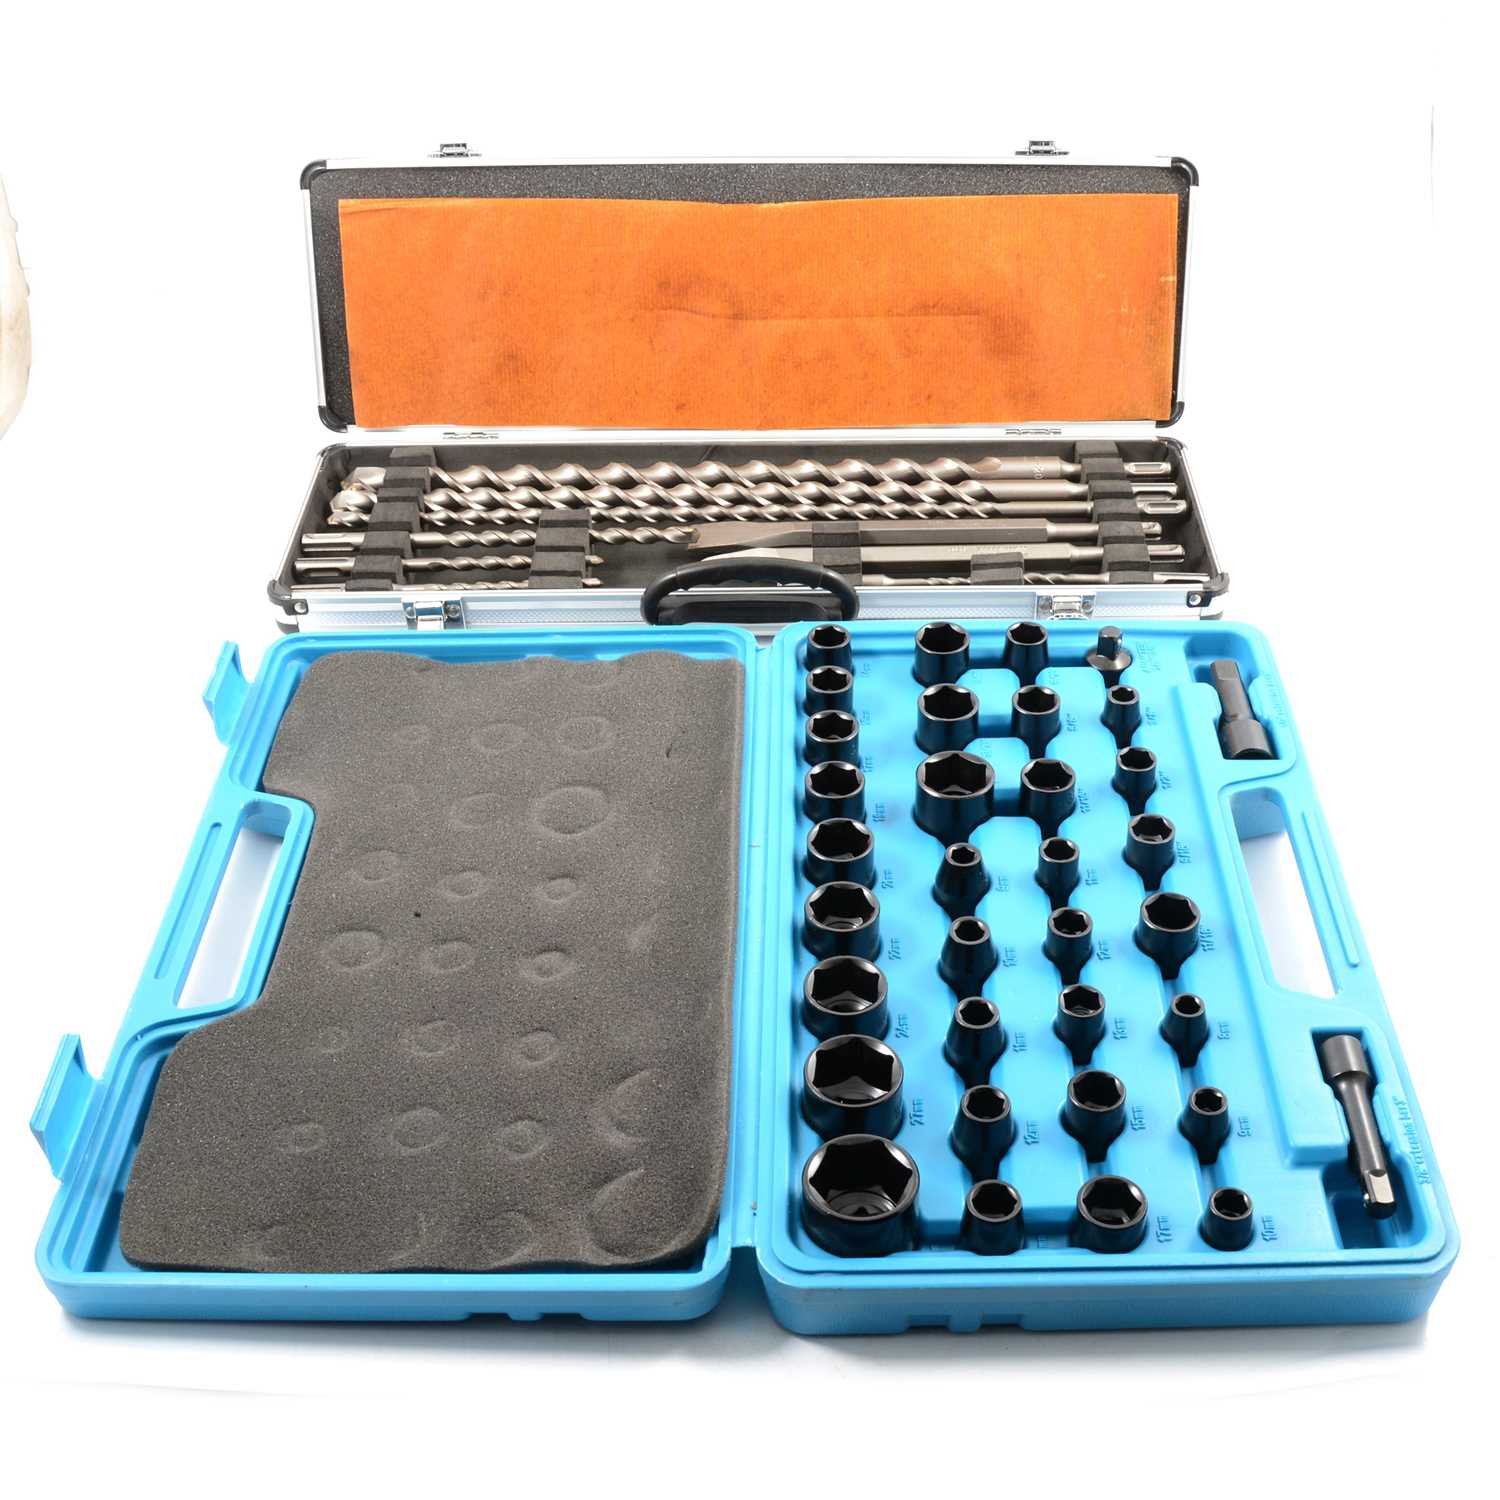 Lot 235 - Makita D21191 chisel hammer bits, cased and a impact socket set unbranded.